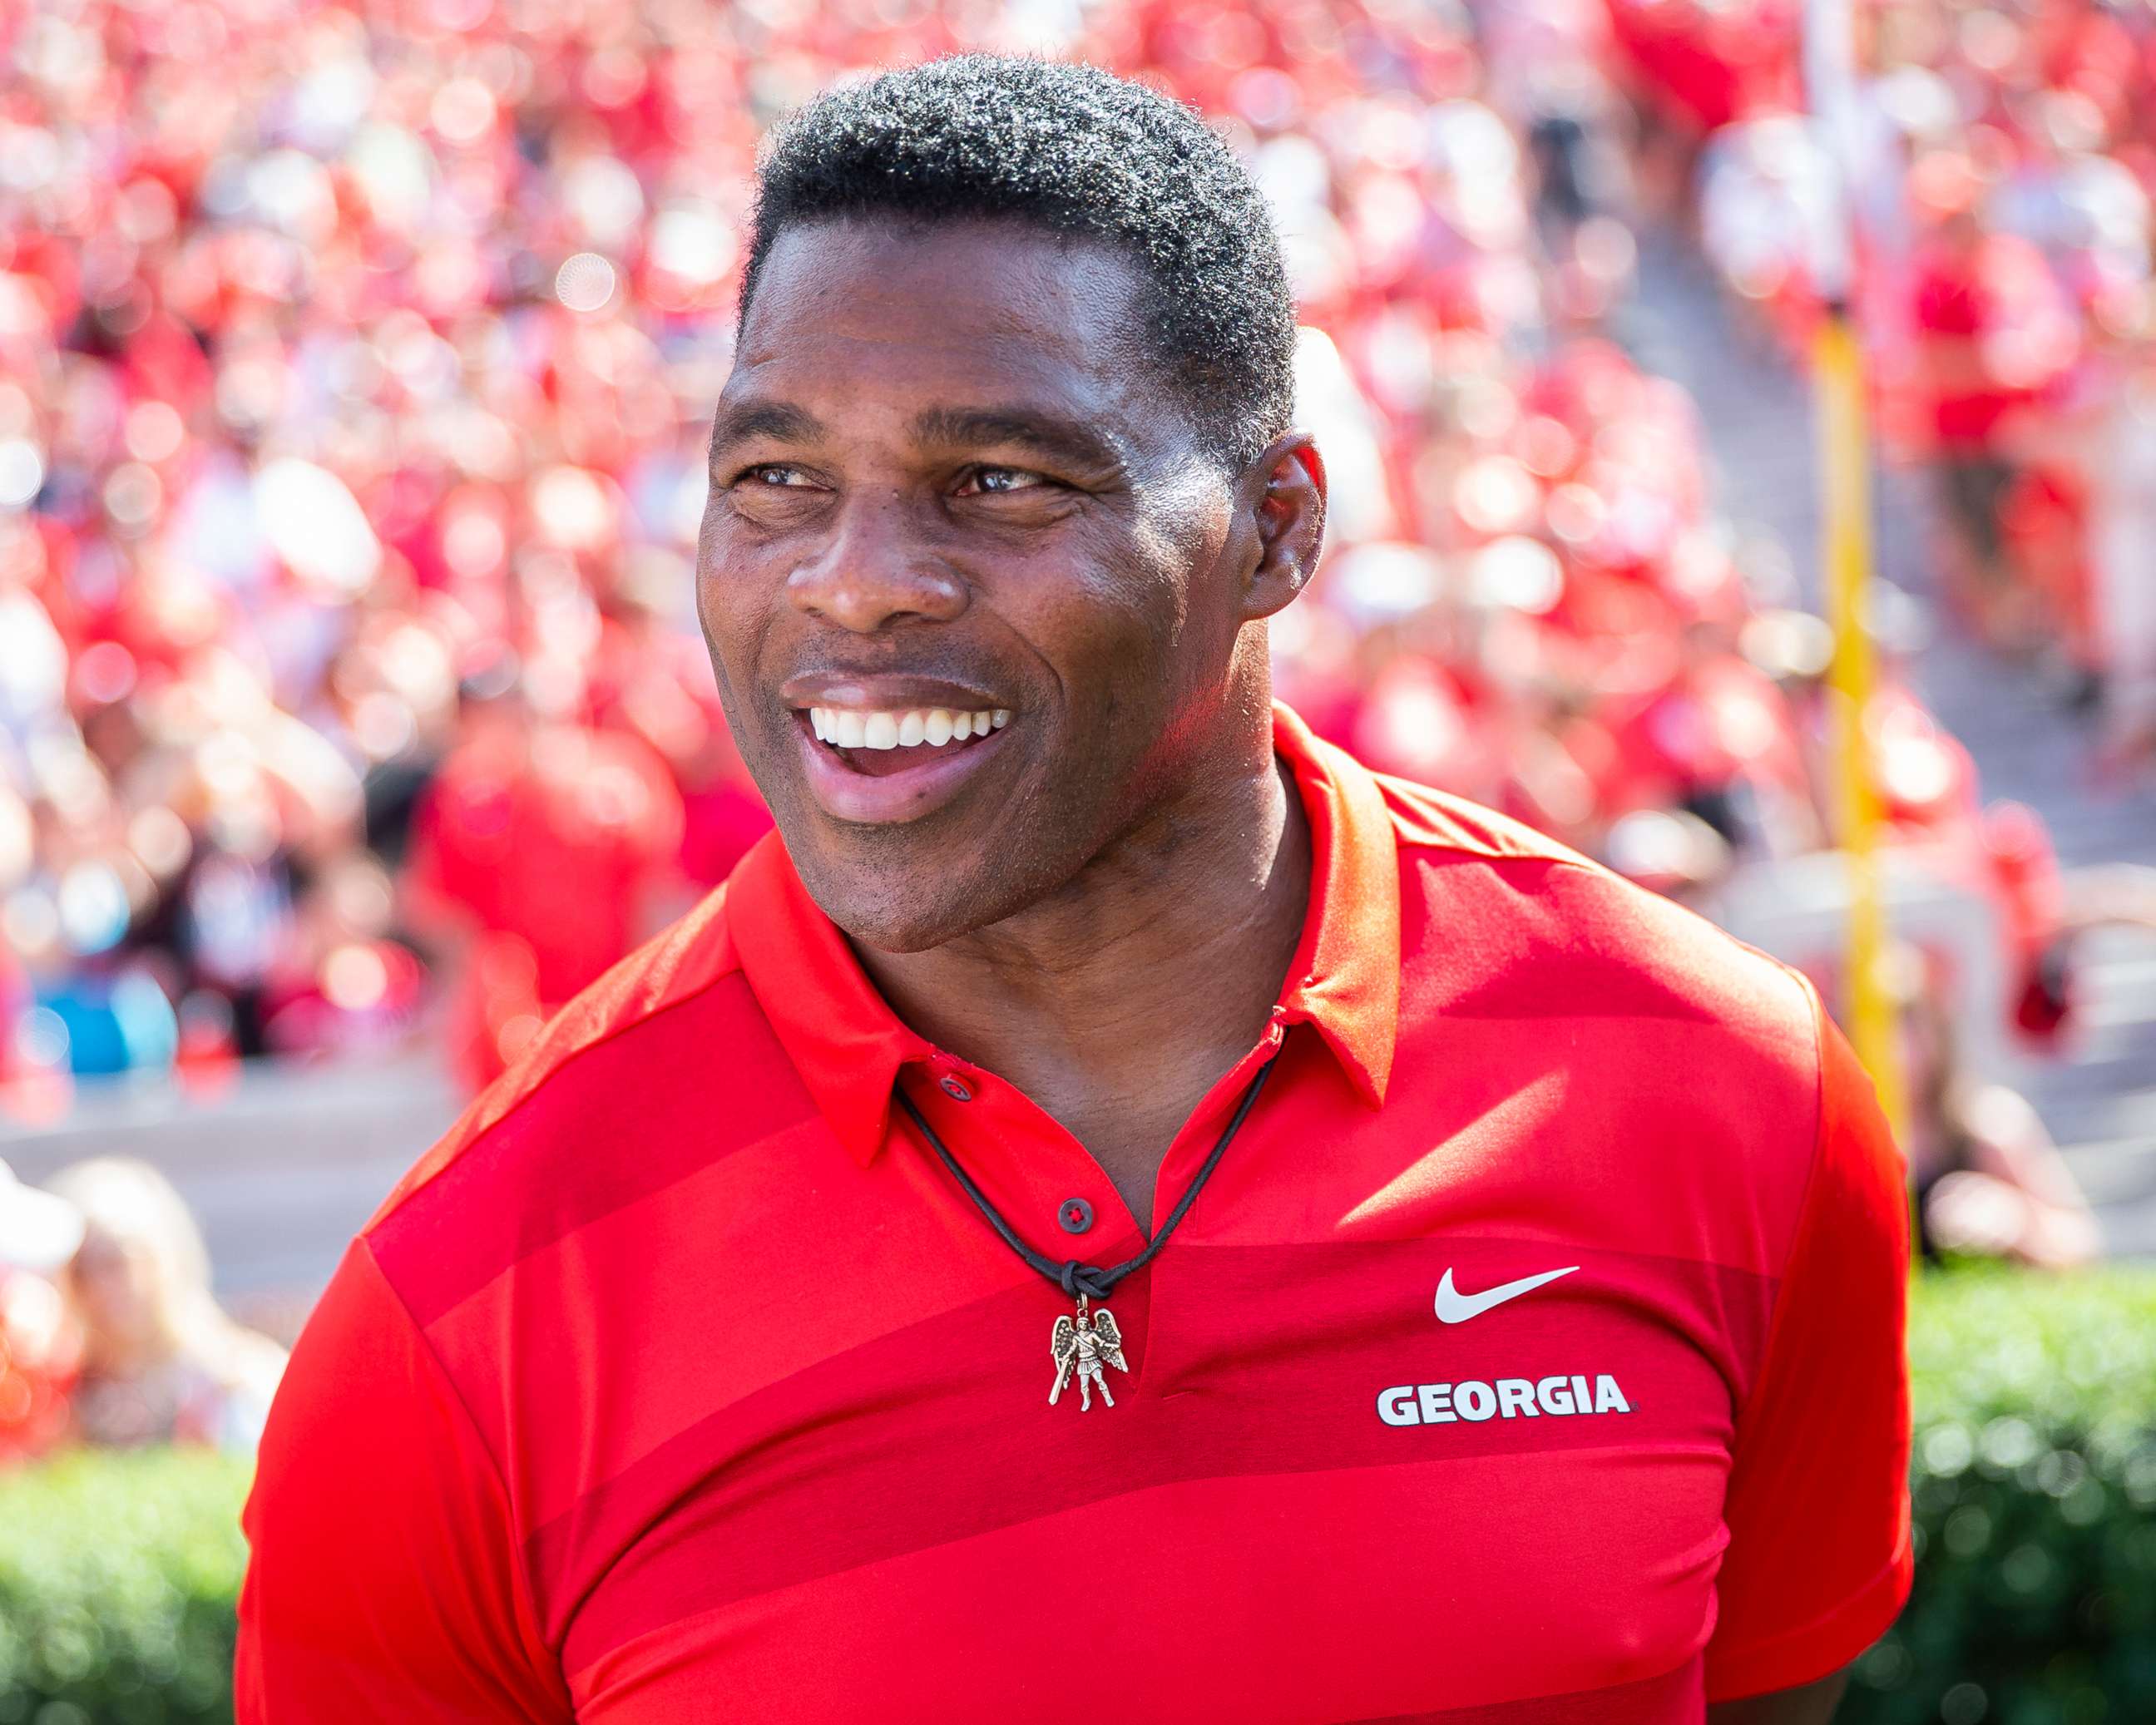 PHOTO: In this Sept. 7, 2019 file photo Georgia alum Herschel Walker on the sidelines during a game between Murray State Racers and University of Georgia Bulldogs at Sanford Stadium on in Athens.